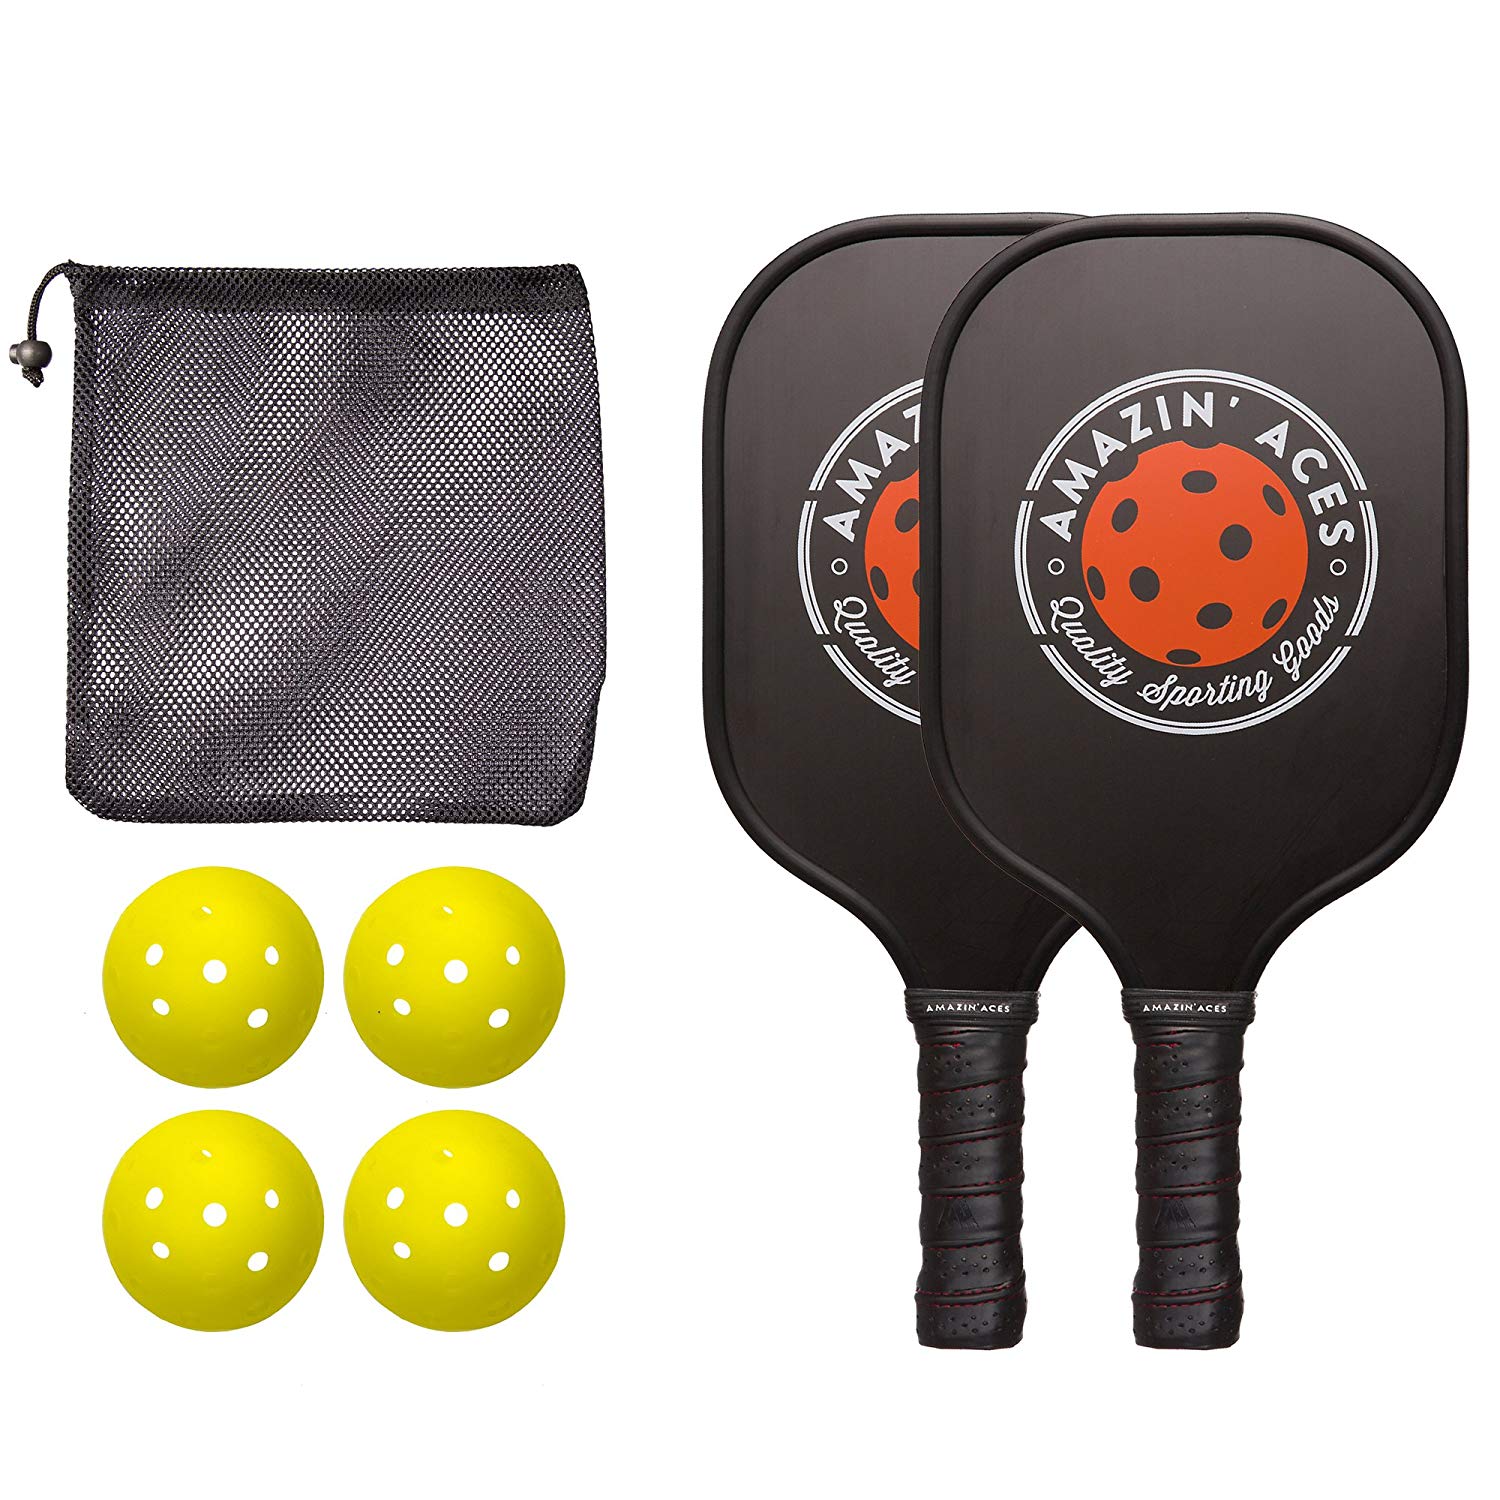 Amazin' Aces Pickleball Paddle Bundle | Set Includes Two Graphite Paddles + Four Balls + One Mesh Pickleball Carrying Bag | Classic Rackets Feature Graphite Face with PP Honeycomb Core